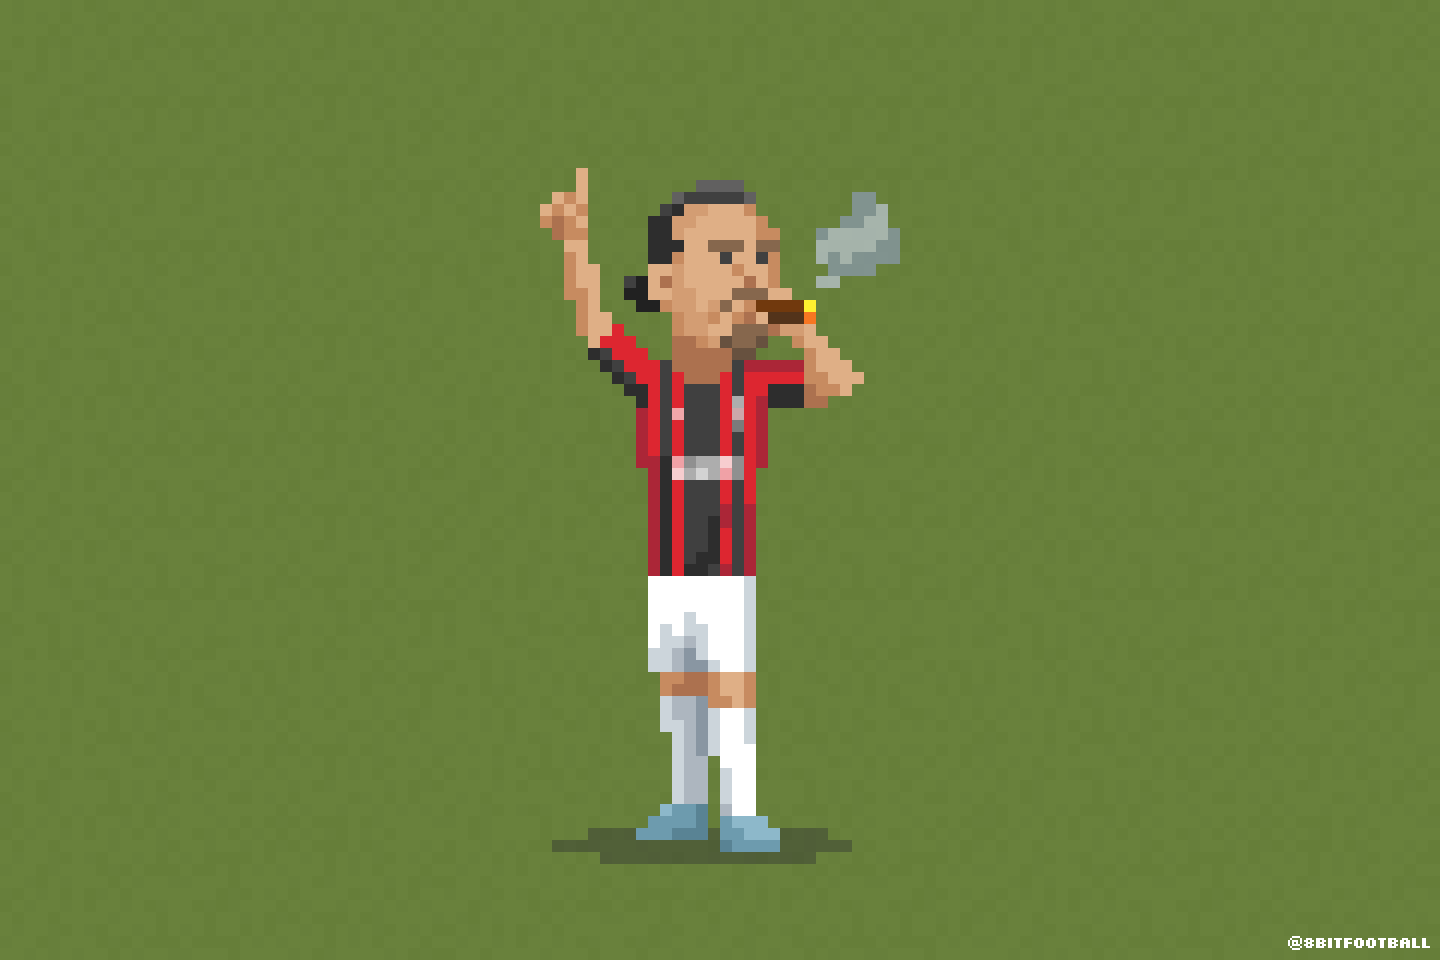 Ibra and the cigar